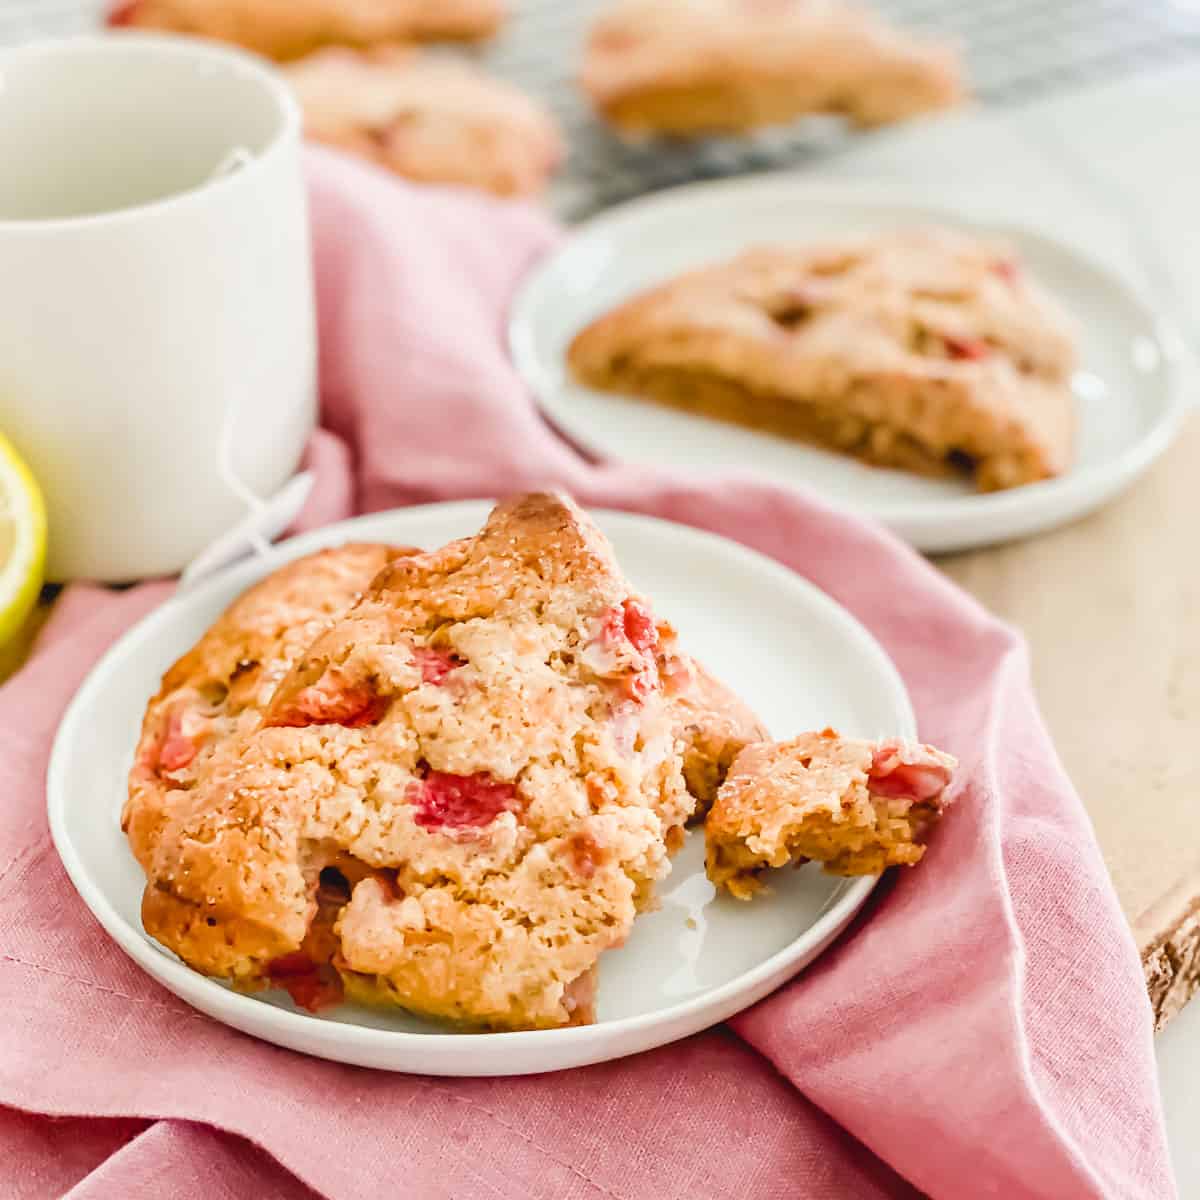 Vegan, gluten-free and grain-free, these strawberry lemon scones are a fresh, bright and delicious spring-time treat to enjoy with a cup of tea or coffee.